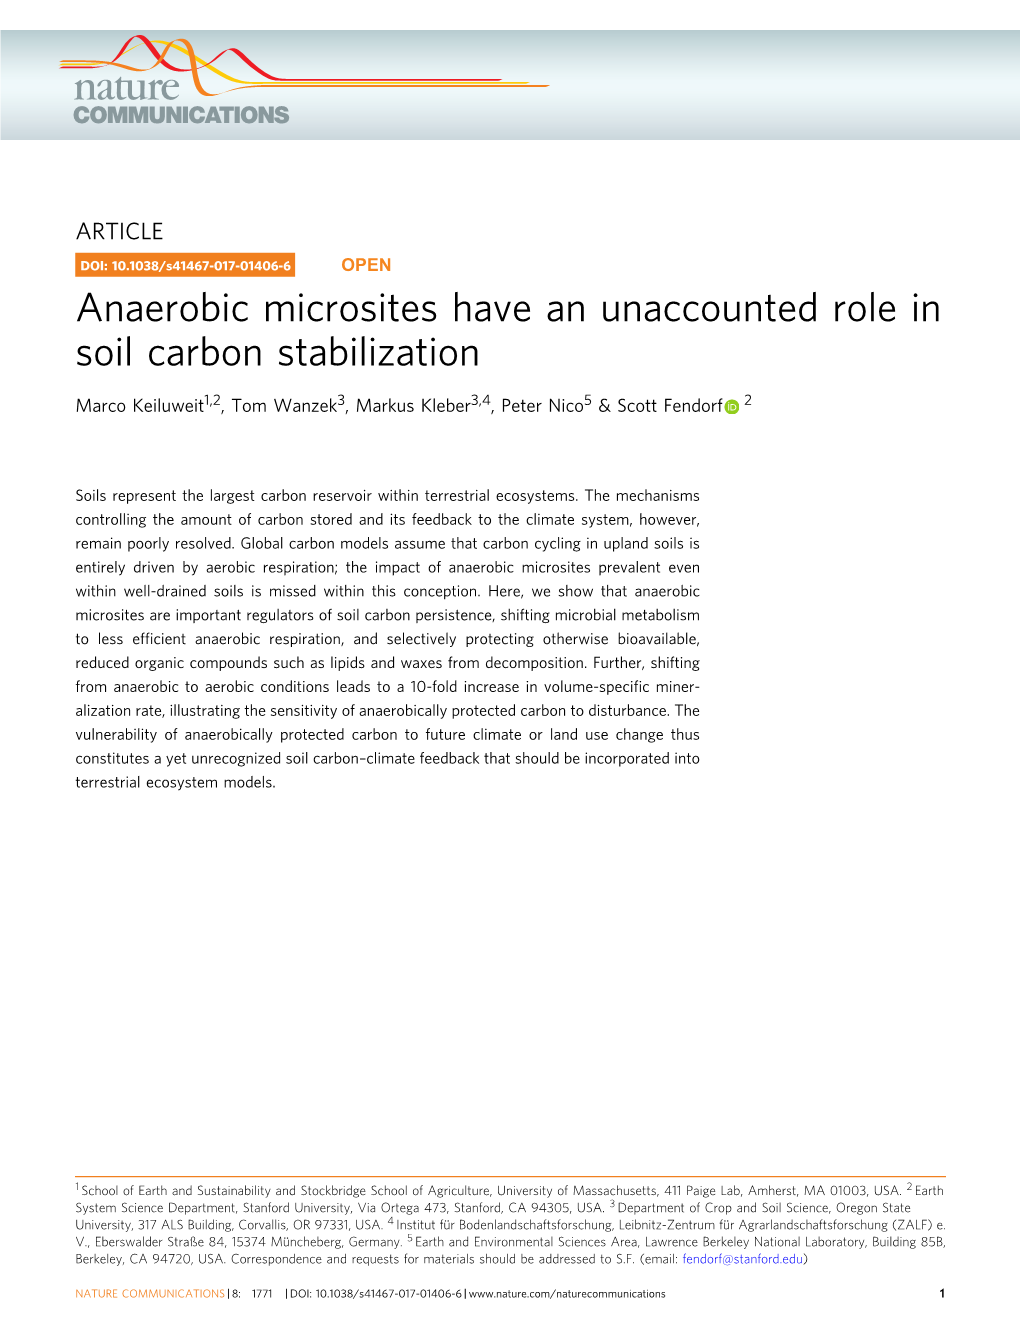 Anaerobic Microsites Have an Unaccounted Role in Soil Carbon Stabilization